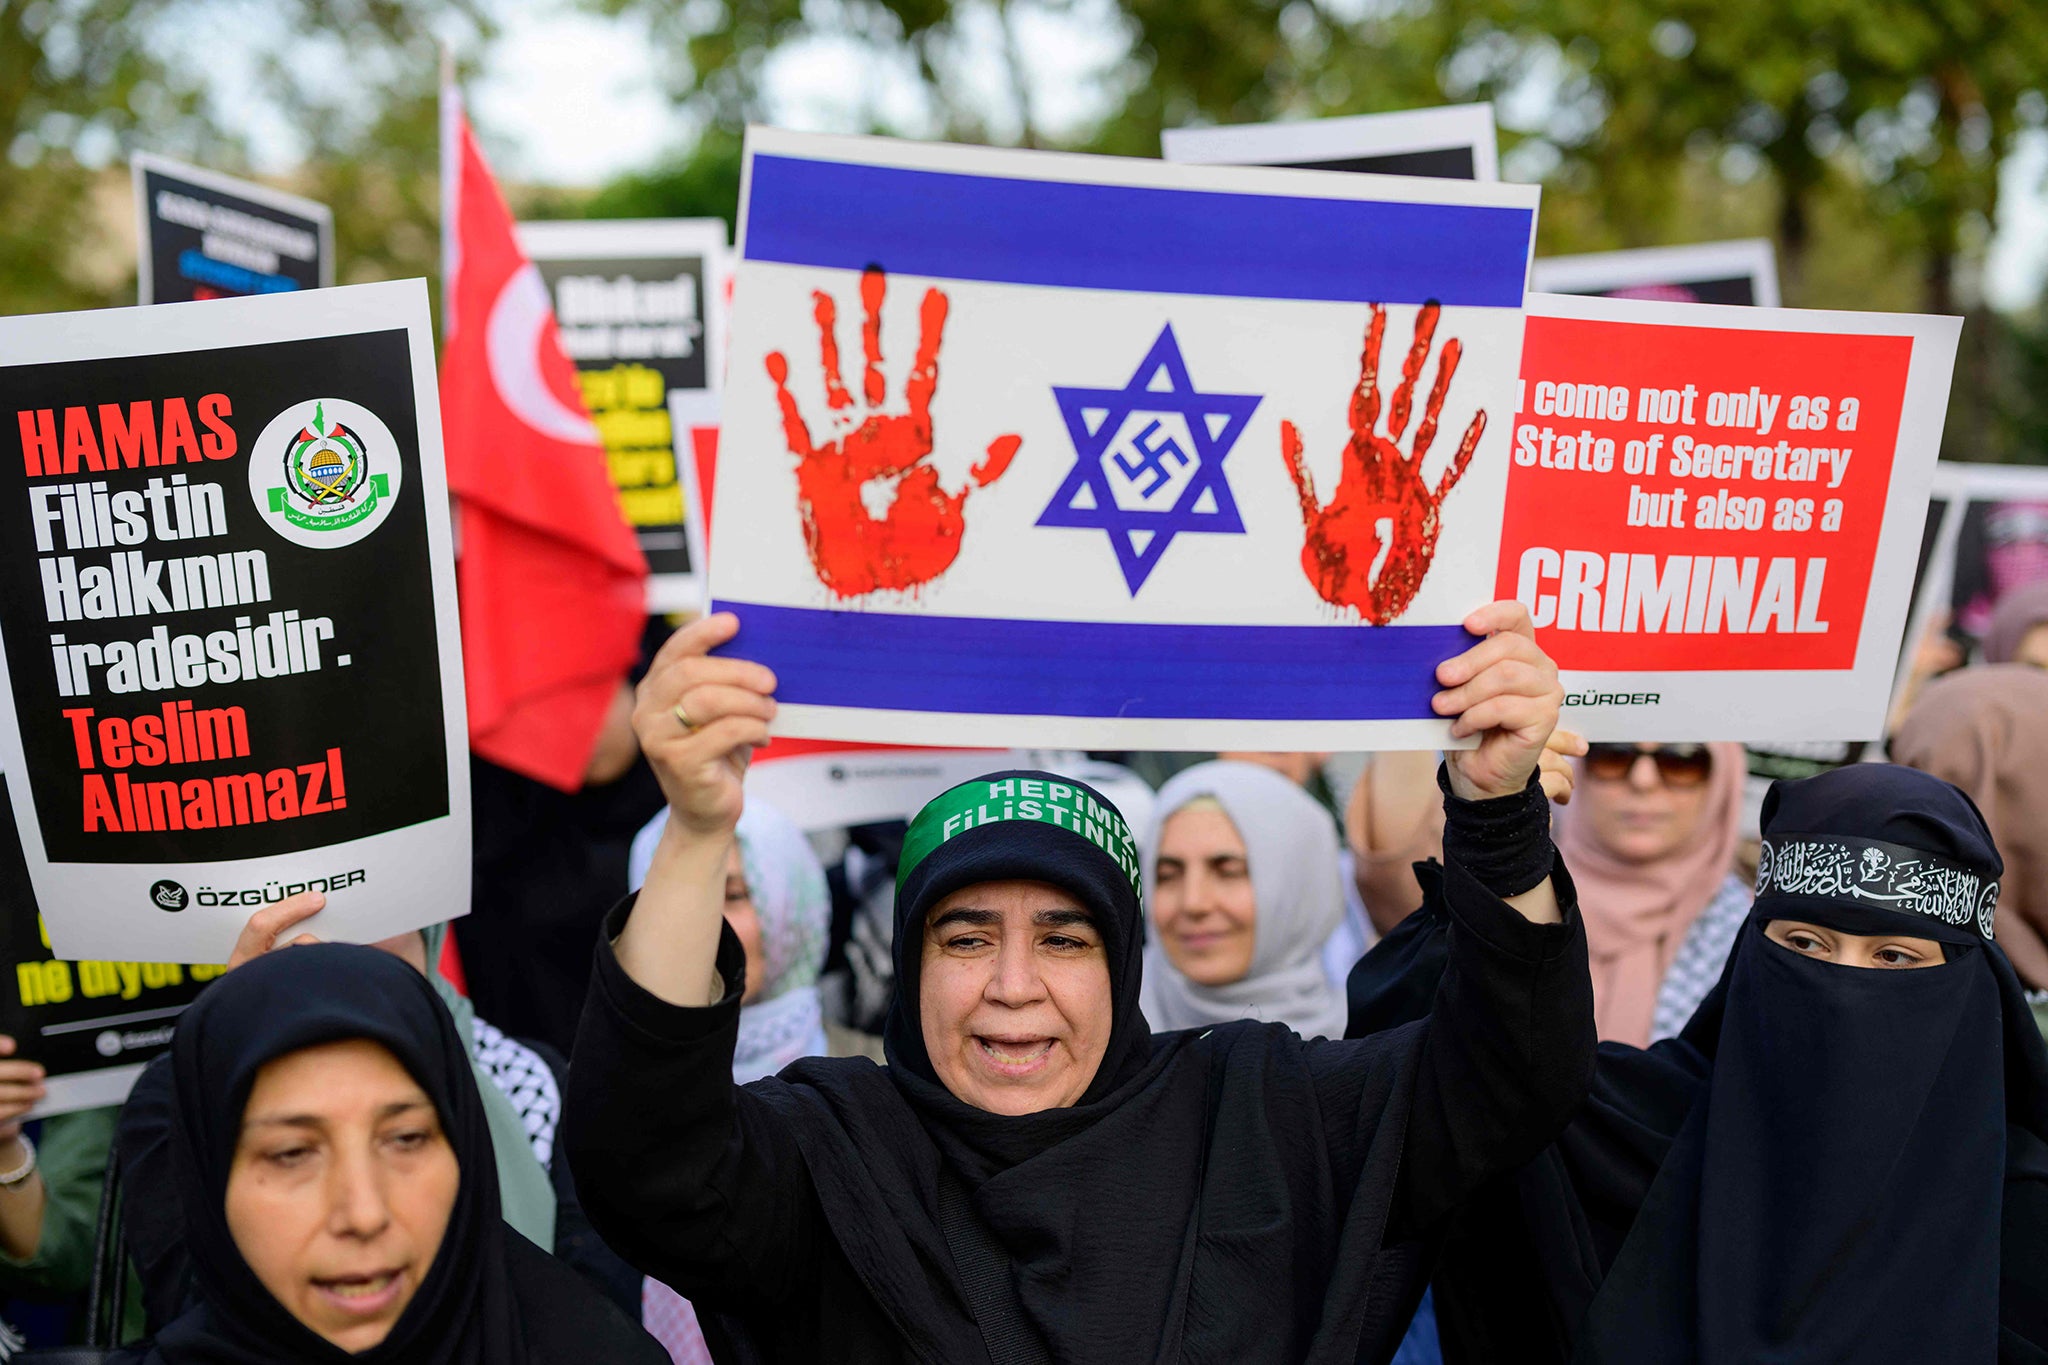 Pro-Palestinian demonstrators hold slogans and a placard representing an Israeli flag with a Nazi swastika inside the Star of David as they take part in a rally against US secretary of state Antony Blinken’s visit to Turkey, in Istanbul